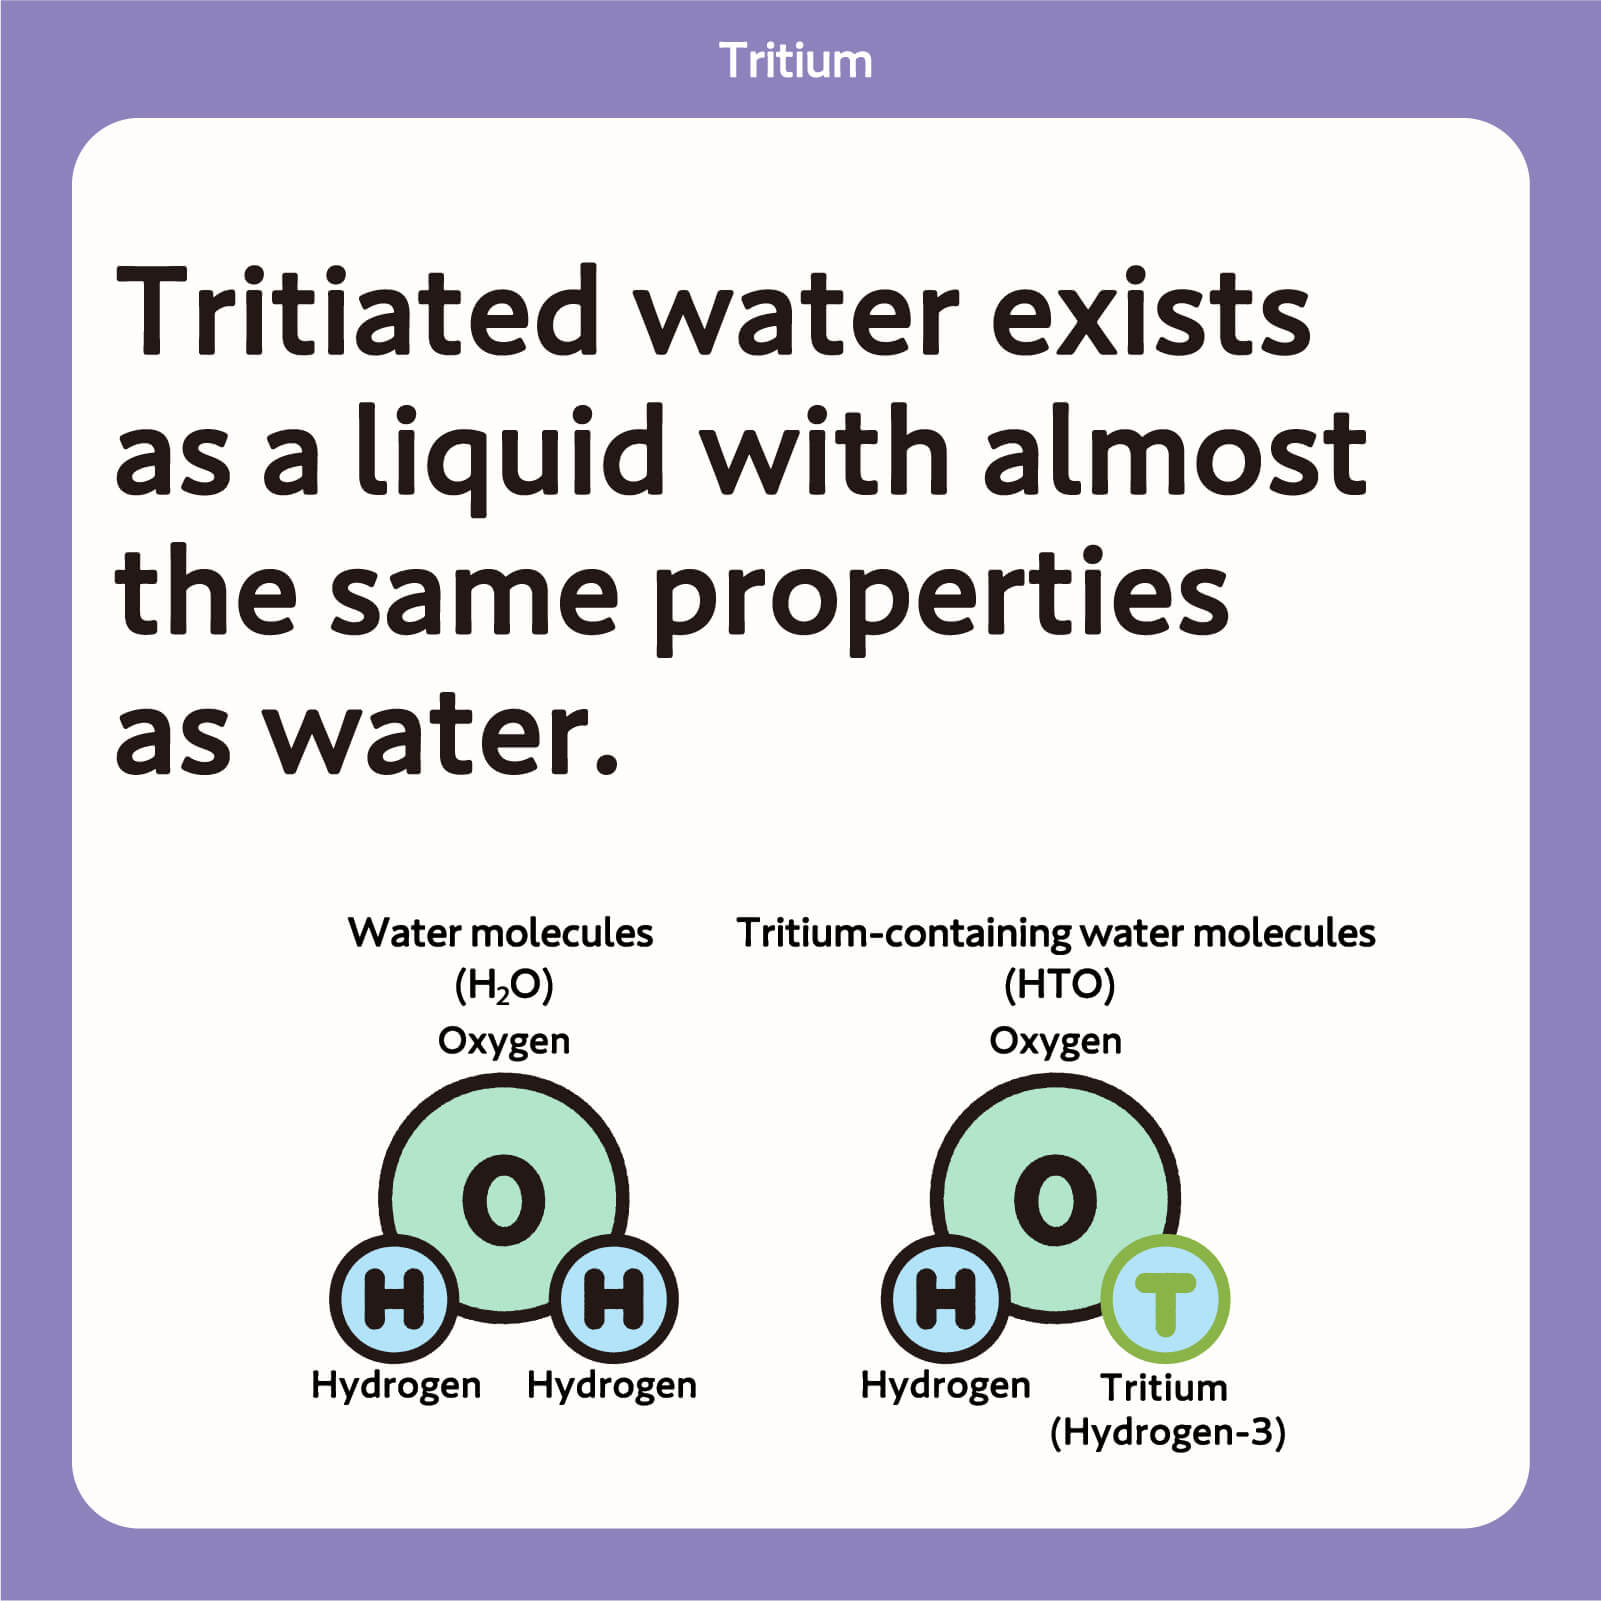 Tritiated water exists as a liquid with almost the same properties as water.